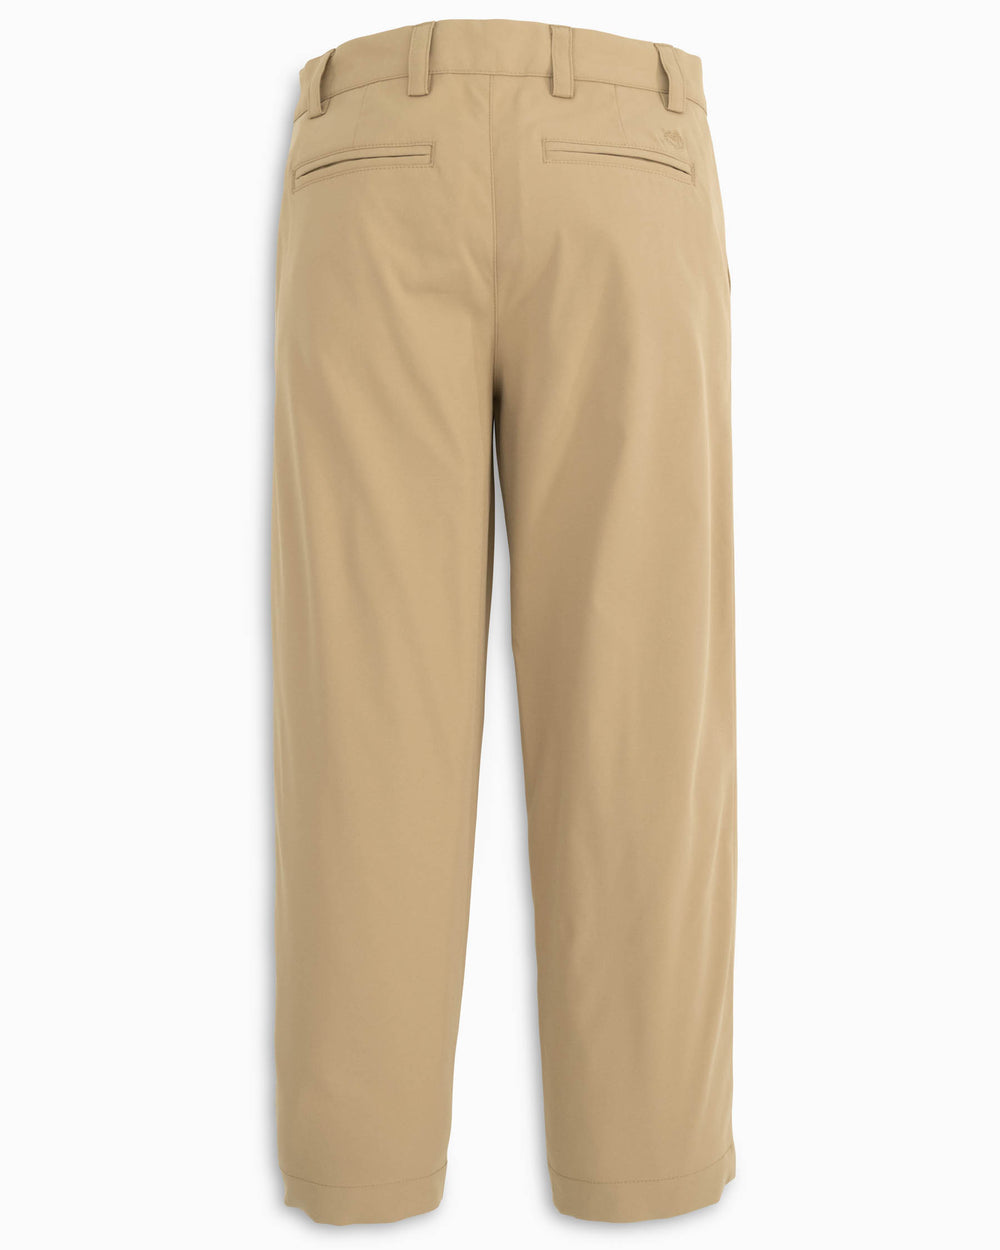 The back view of the Youth Leadhead Performance Pant by Southern Tide - Sandstone Khaki